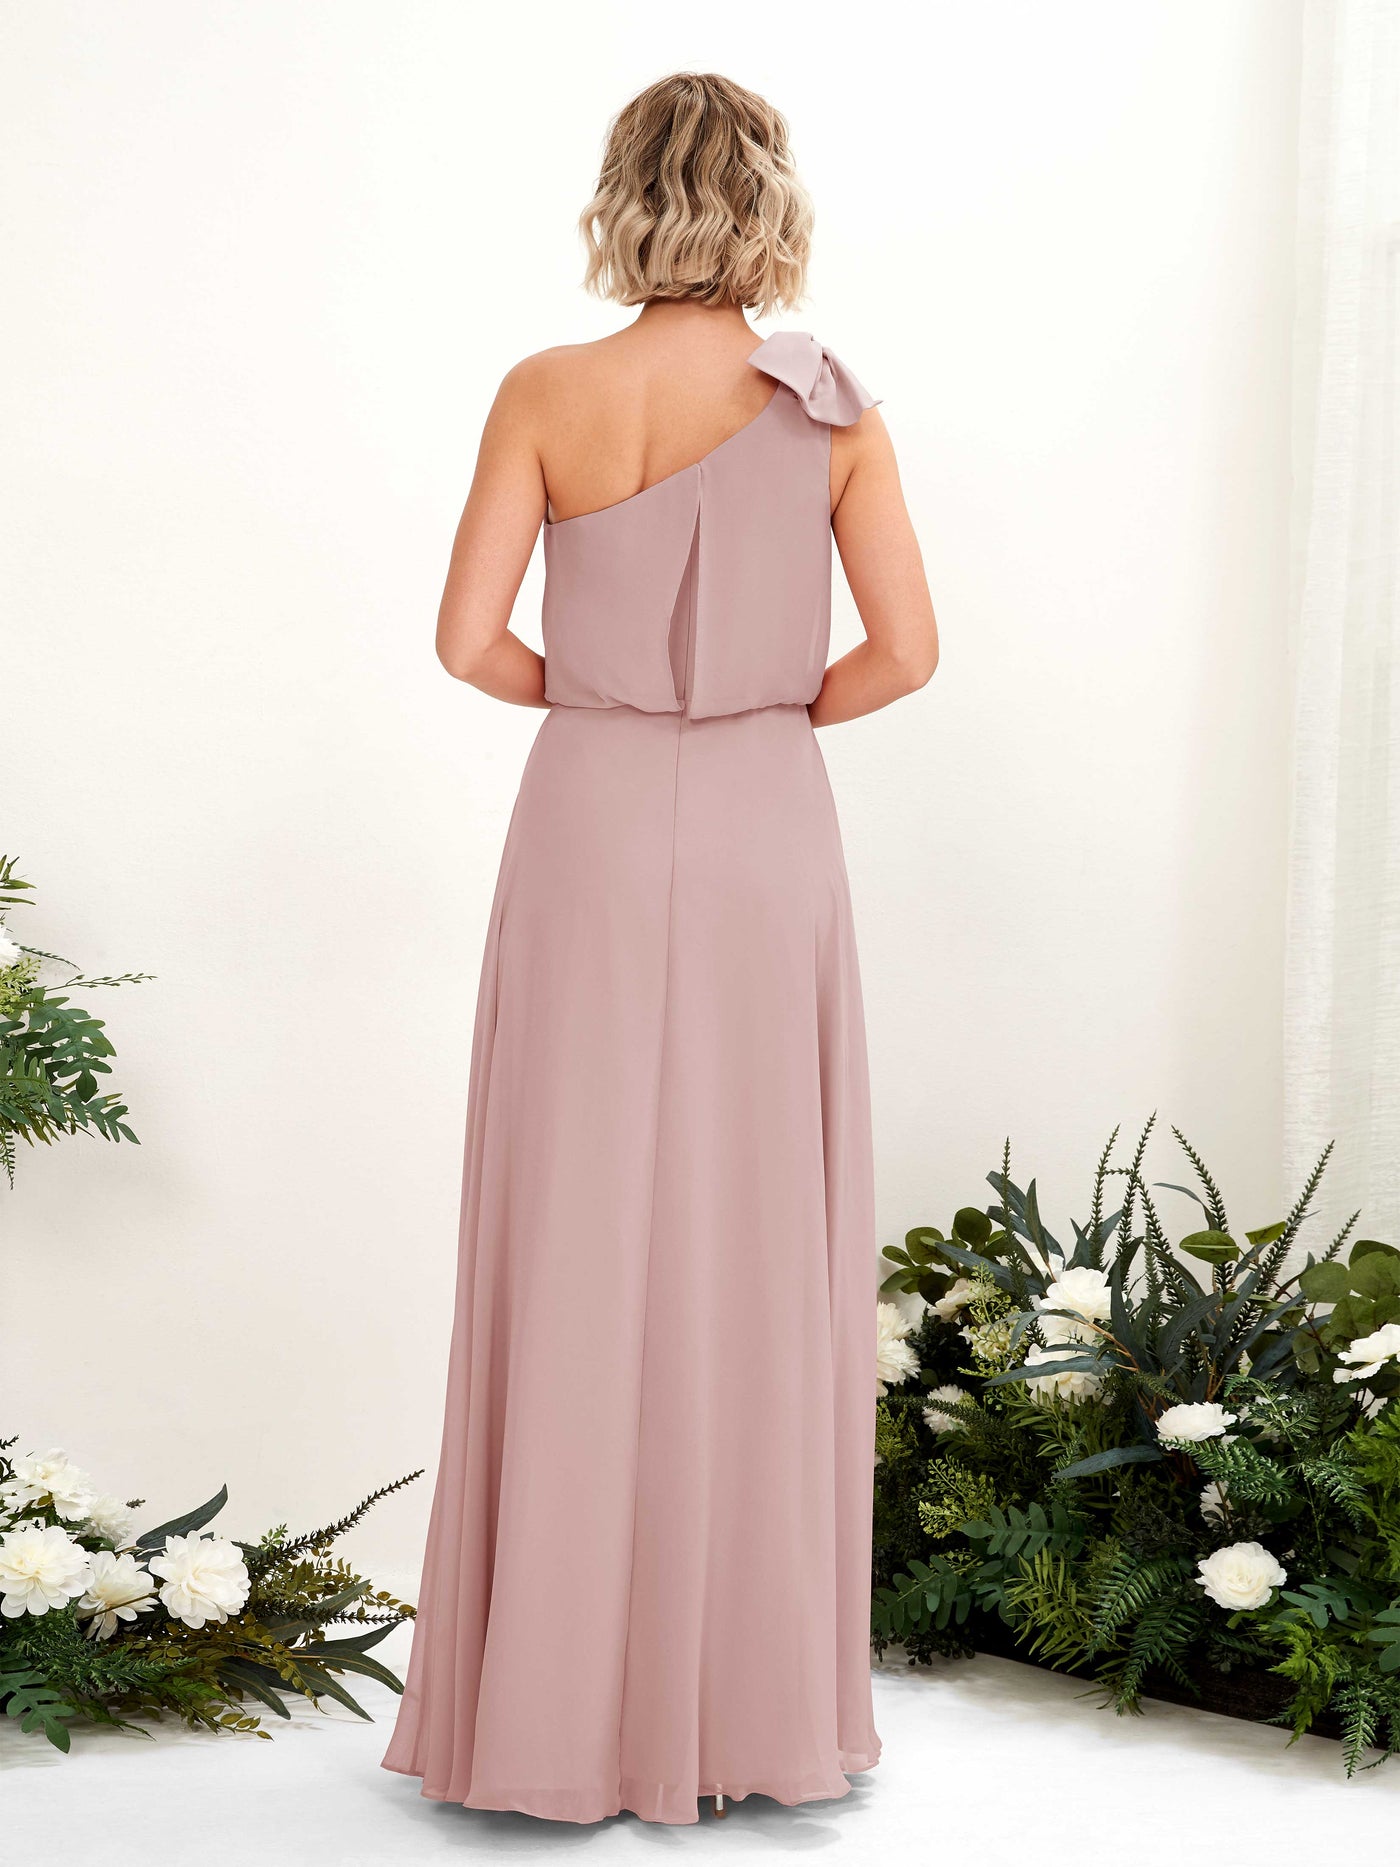 Dusty Rose Bridesmaid Dresses Bridesmaid Dress A-line Chiffon One Shoulder Full Length Sleeveless Wedding Party Dress (81225509)#color_dusty-rose